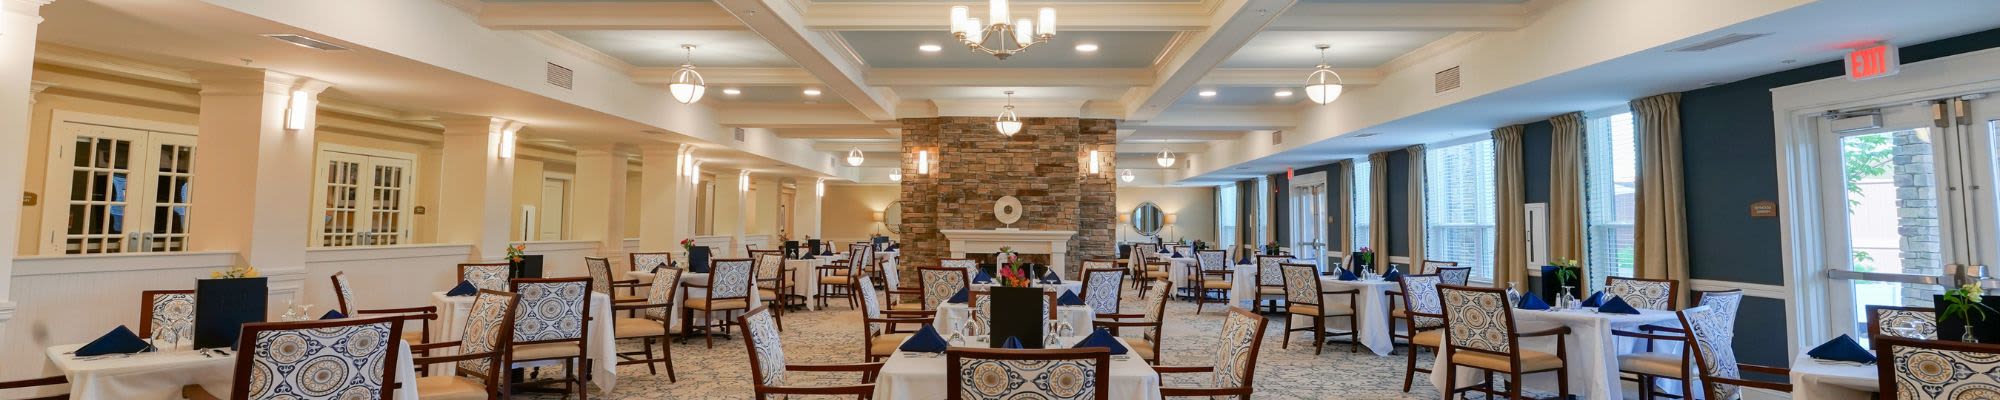 Dining at The Harmony Collection at Hanover in Mechanicsville, Virginia